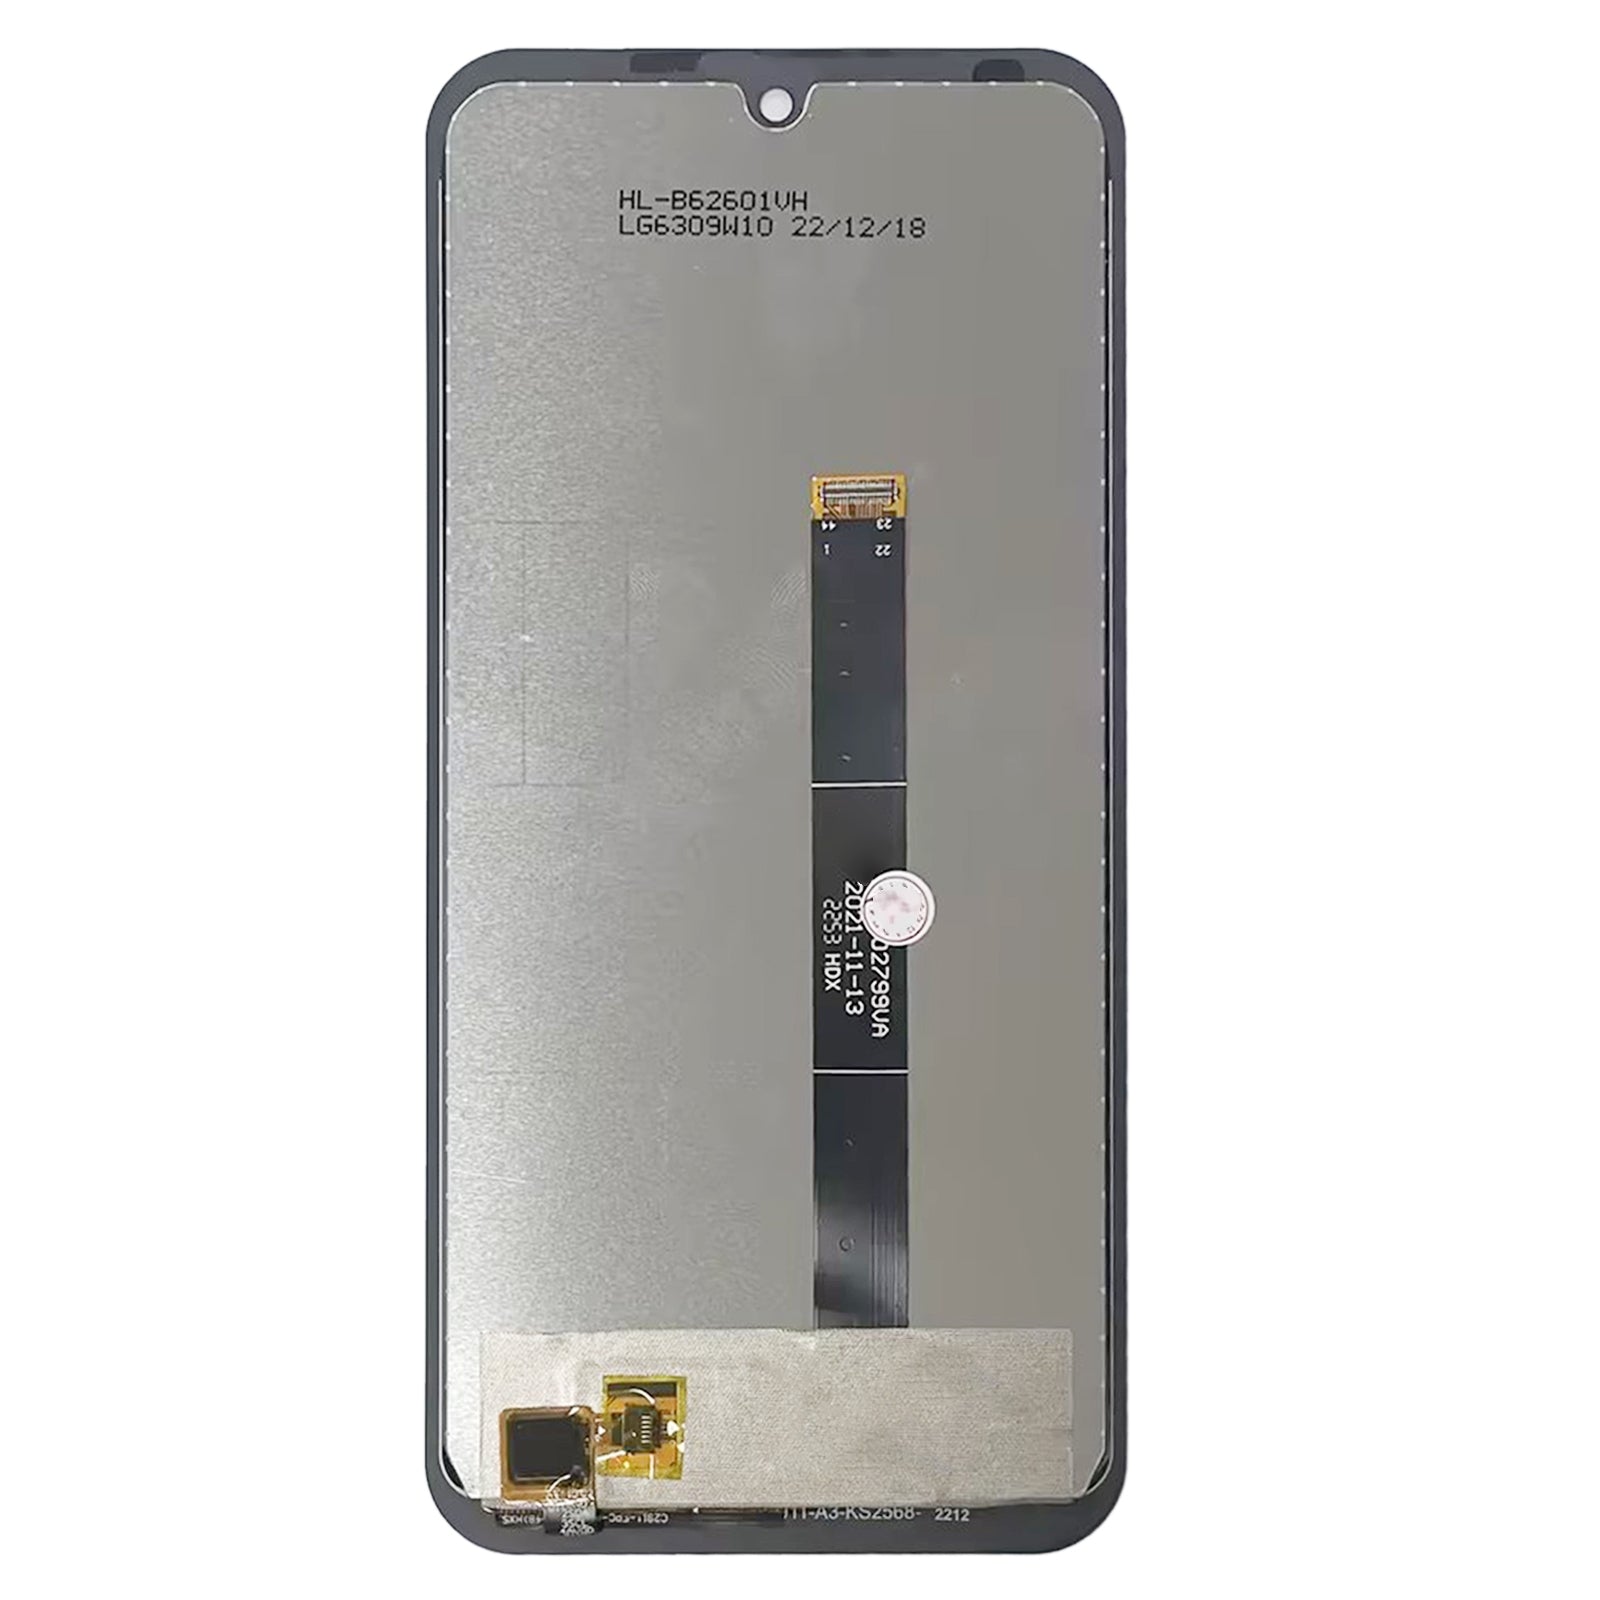 Hotwav Cyber ​​9 Pro LCD Screen and Digitizer Complete Assembly